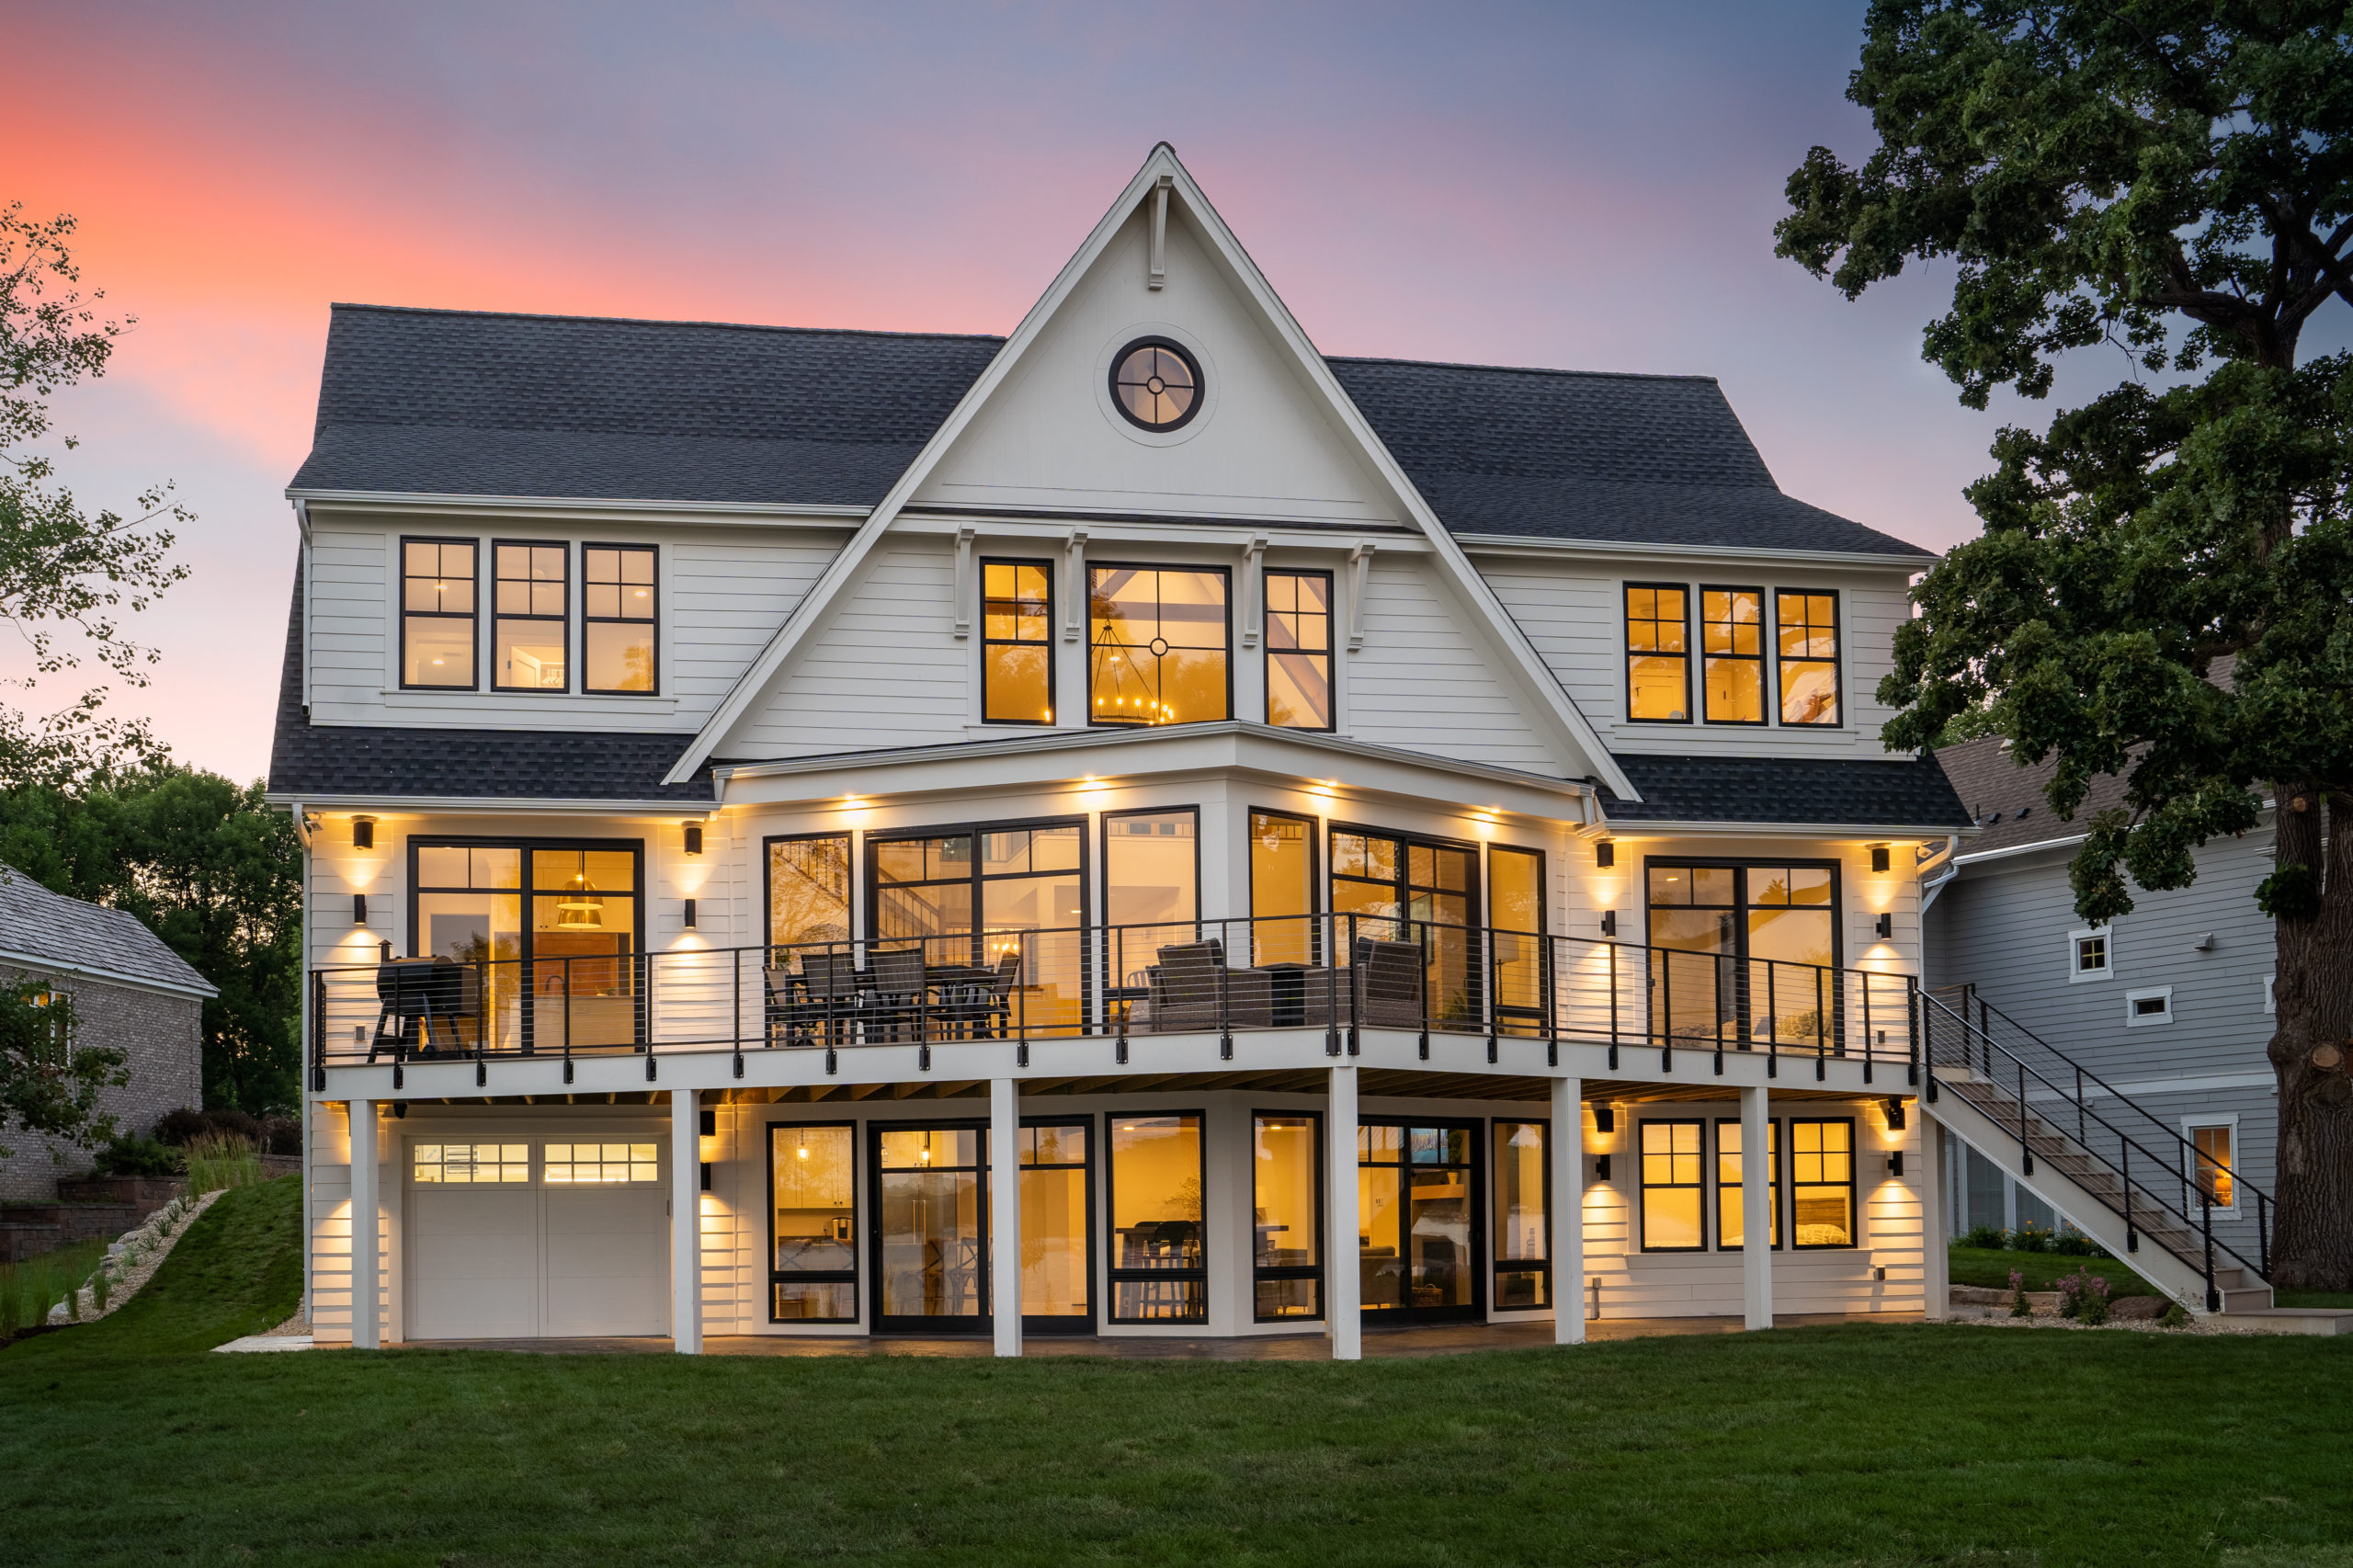 A large white house with a spacious deck at dusk, perfect for home exterior design ideas.